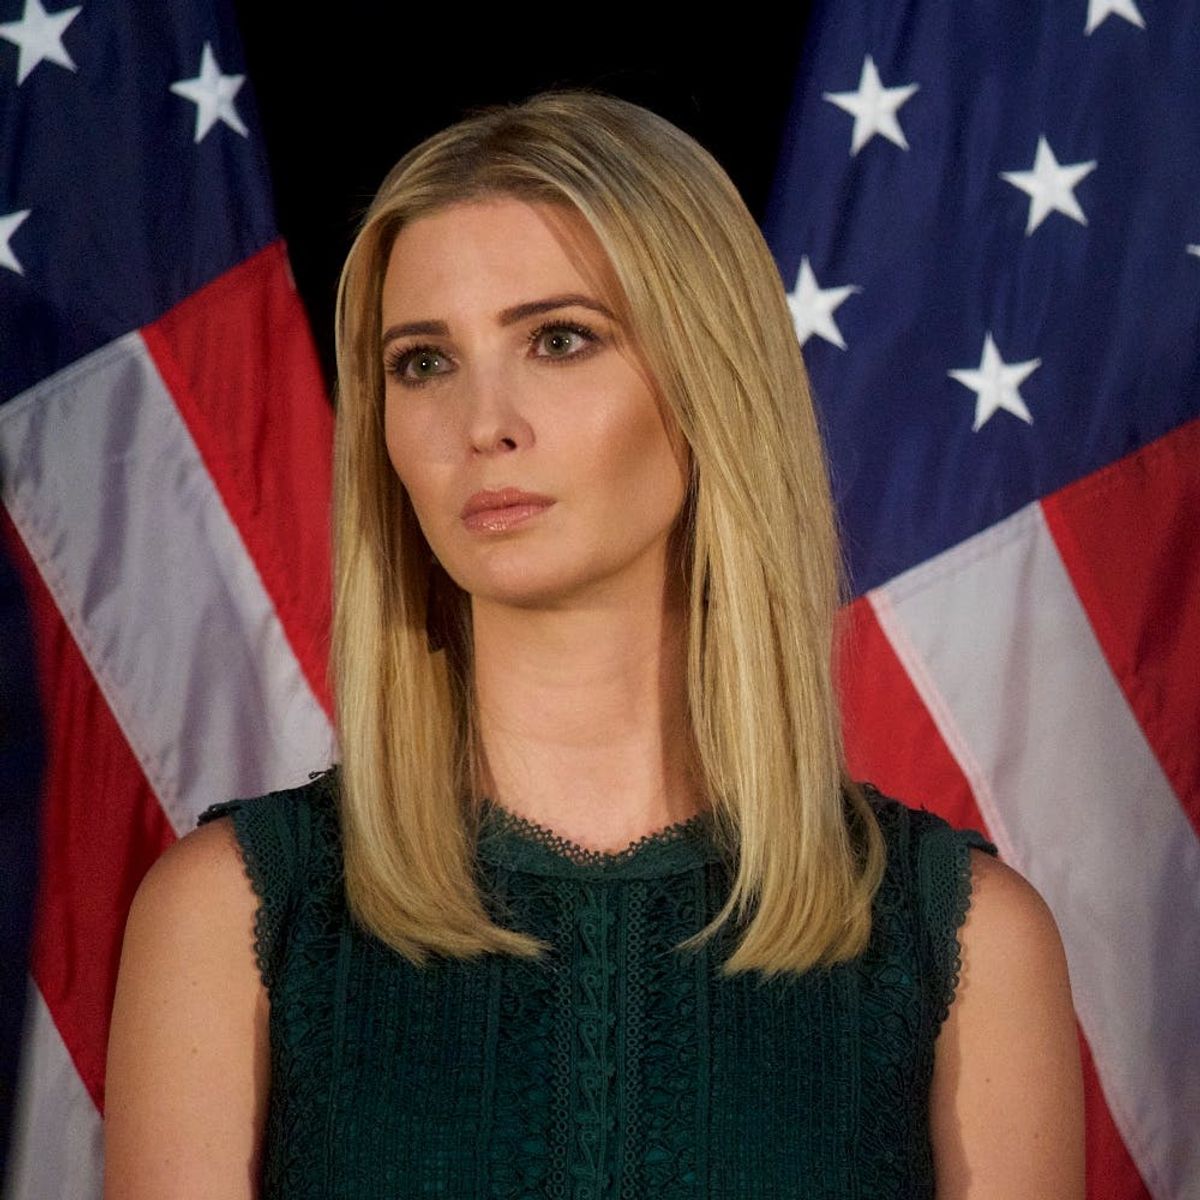 Ivanka Trump Says Her Father’s Comments Were “Inappropriate and Offensive”